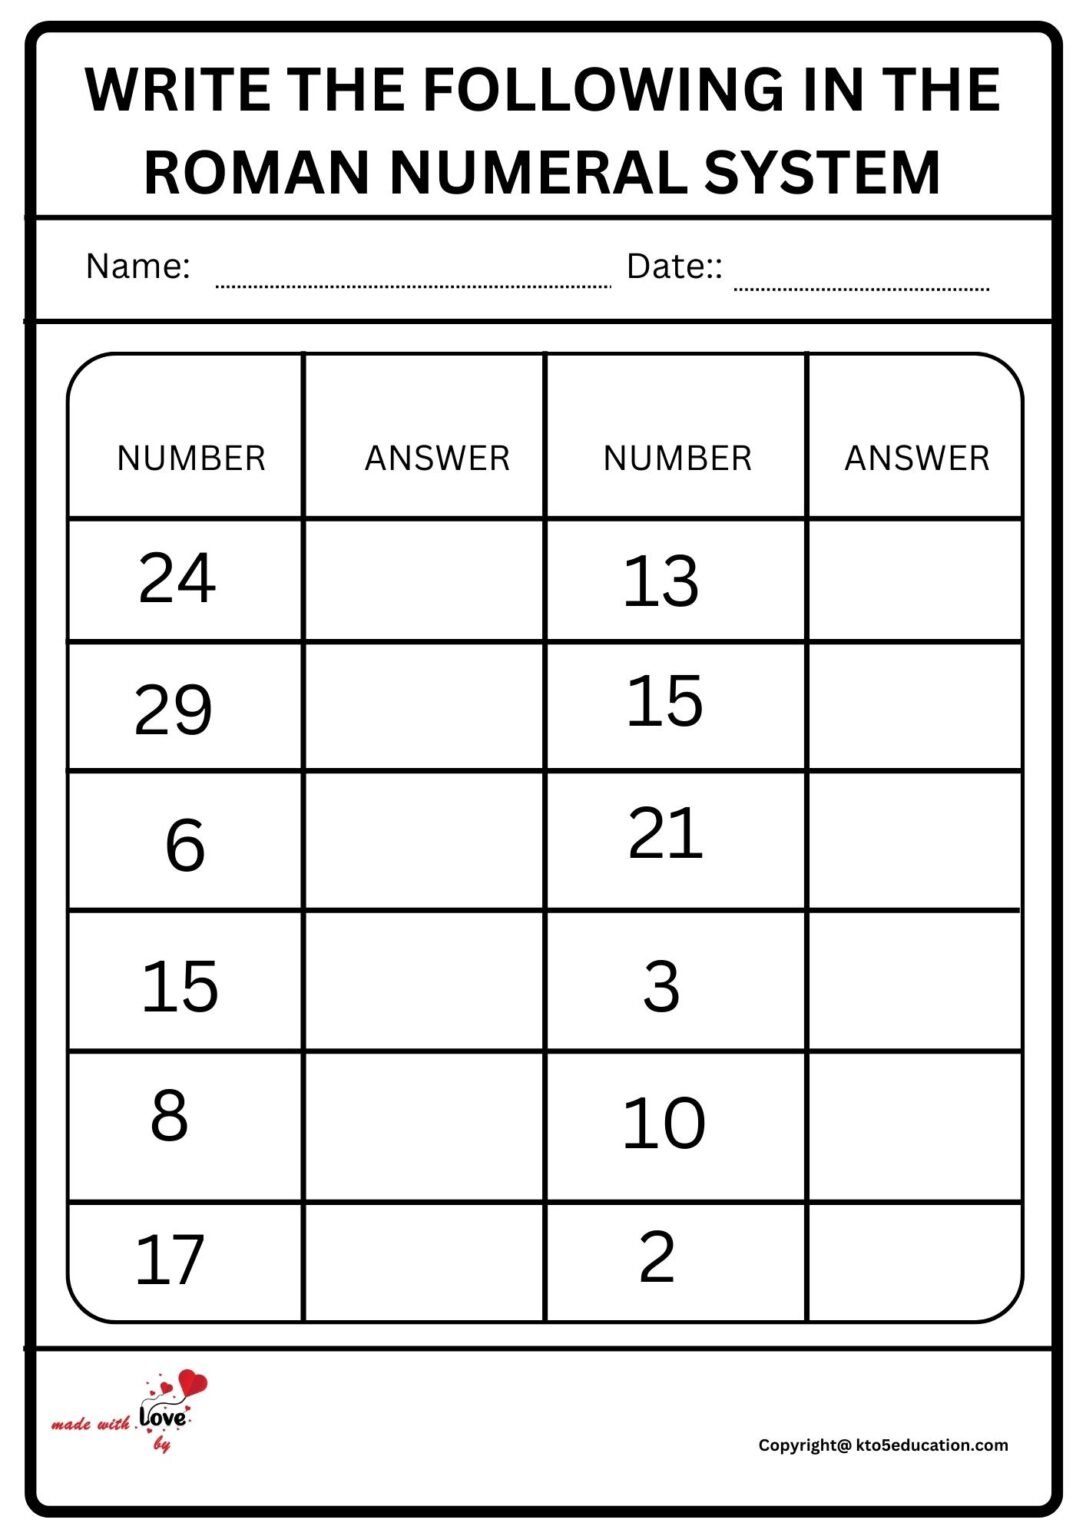 write-the-following-in-the-roman-number-system-worksheet